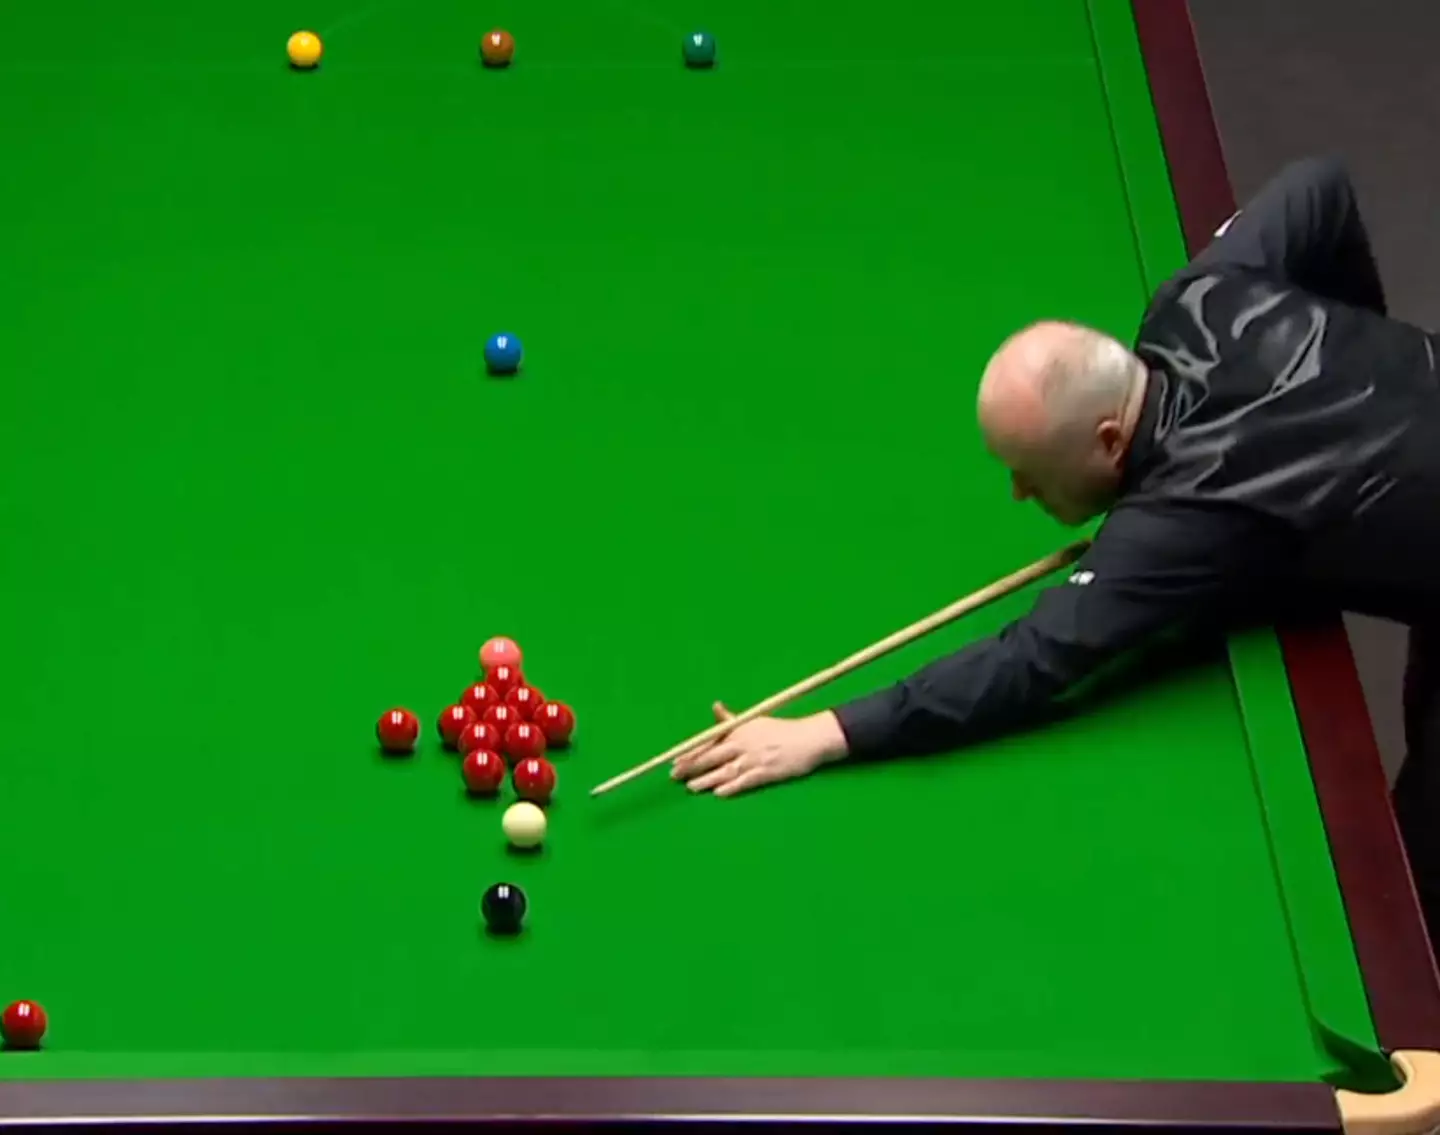 Neal Foulds pointed out an issue with the tables during this year's World Snooker Championships.